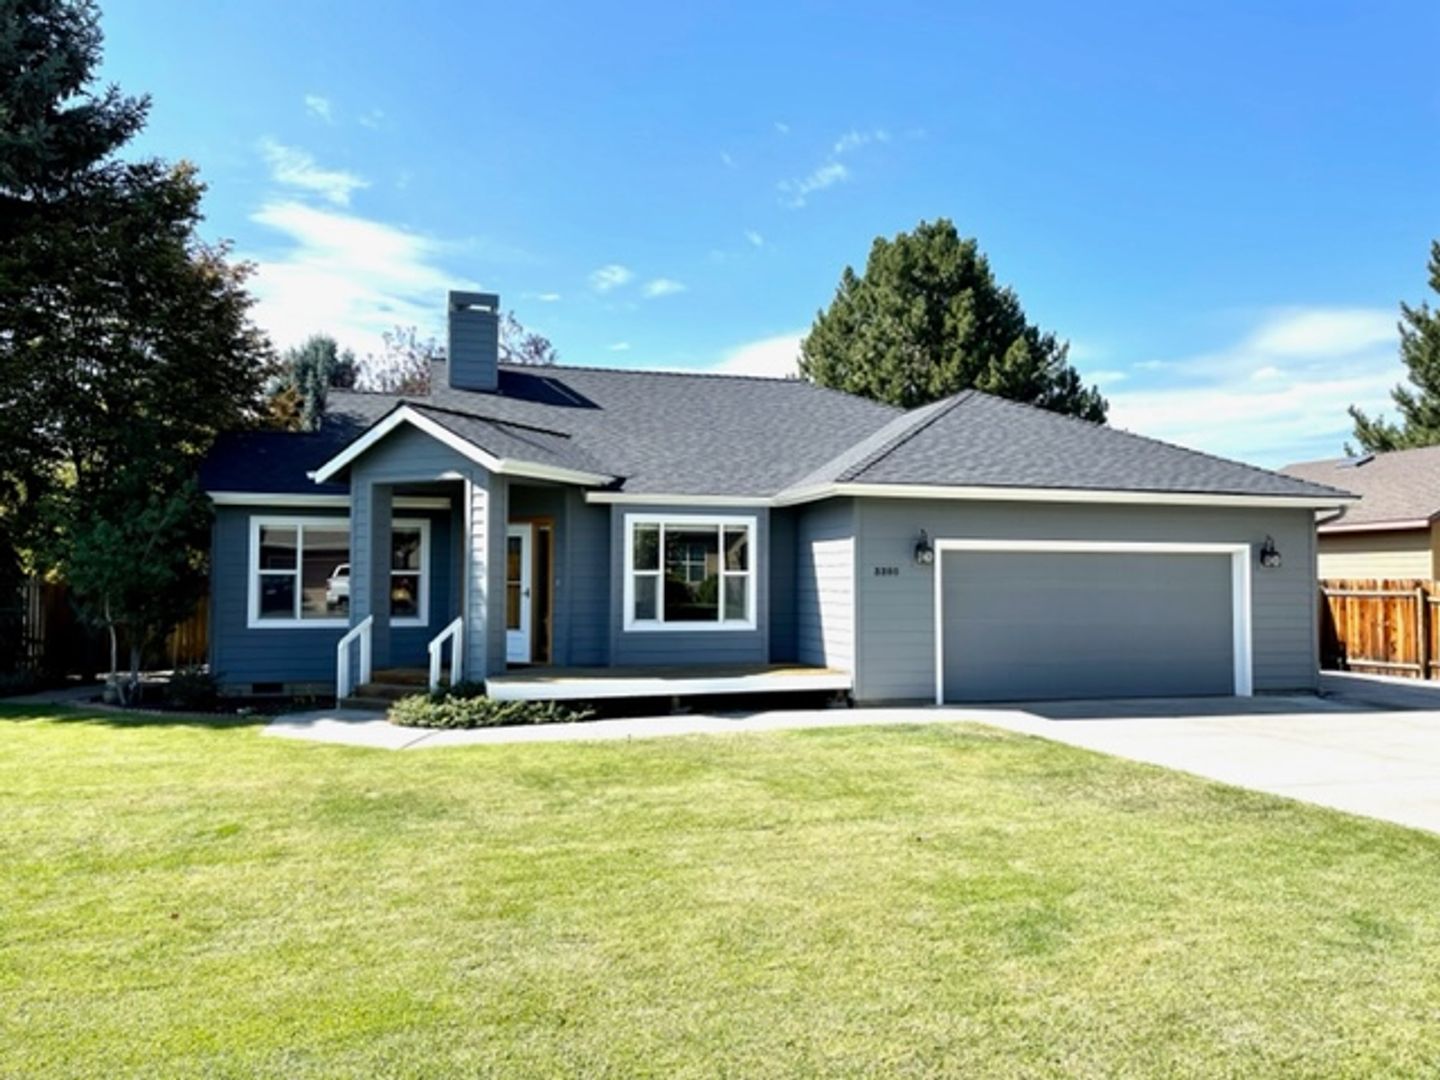 home buying and rentals in bend oregon